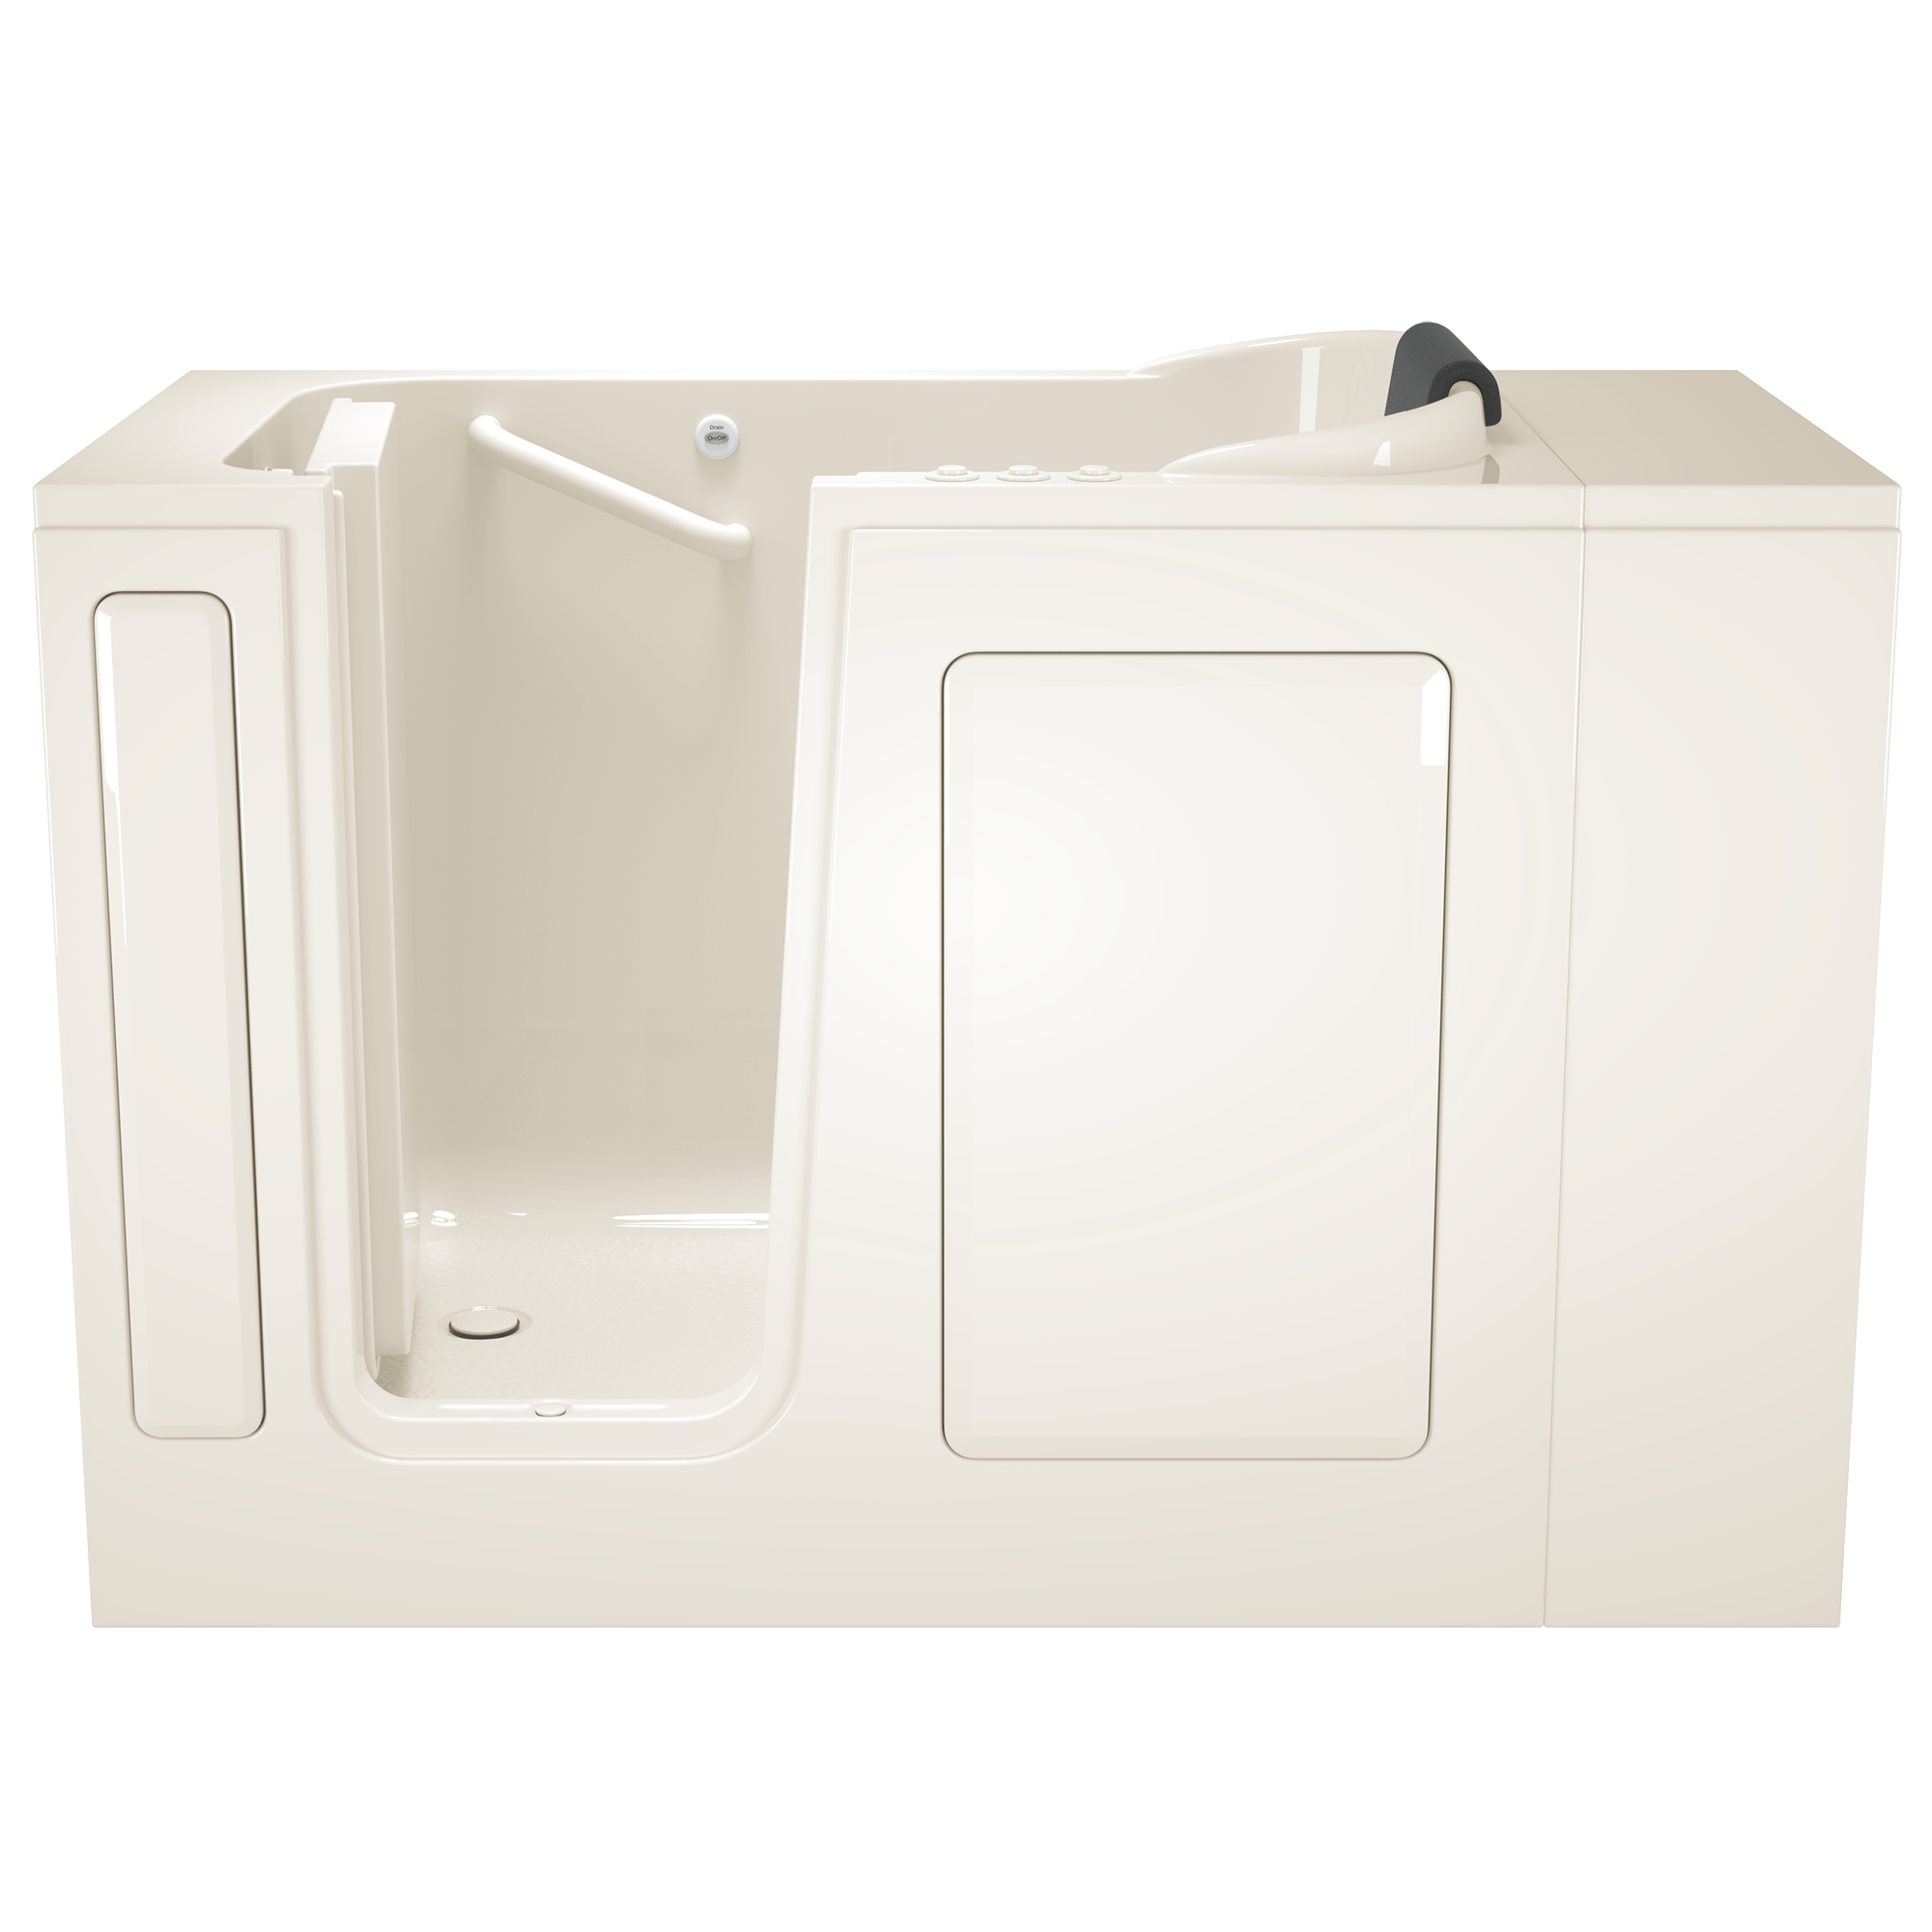 Gelcoat Premium Series 28 x 48-Inch Walk-in Tub With Combination Air Spa and Whirlpool Systems - Left-Hand Drain